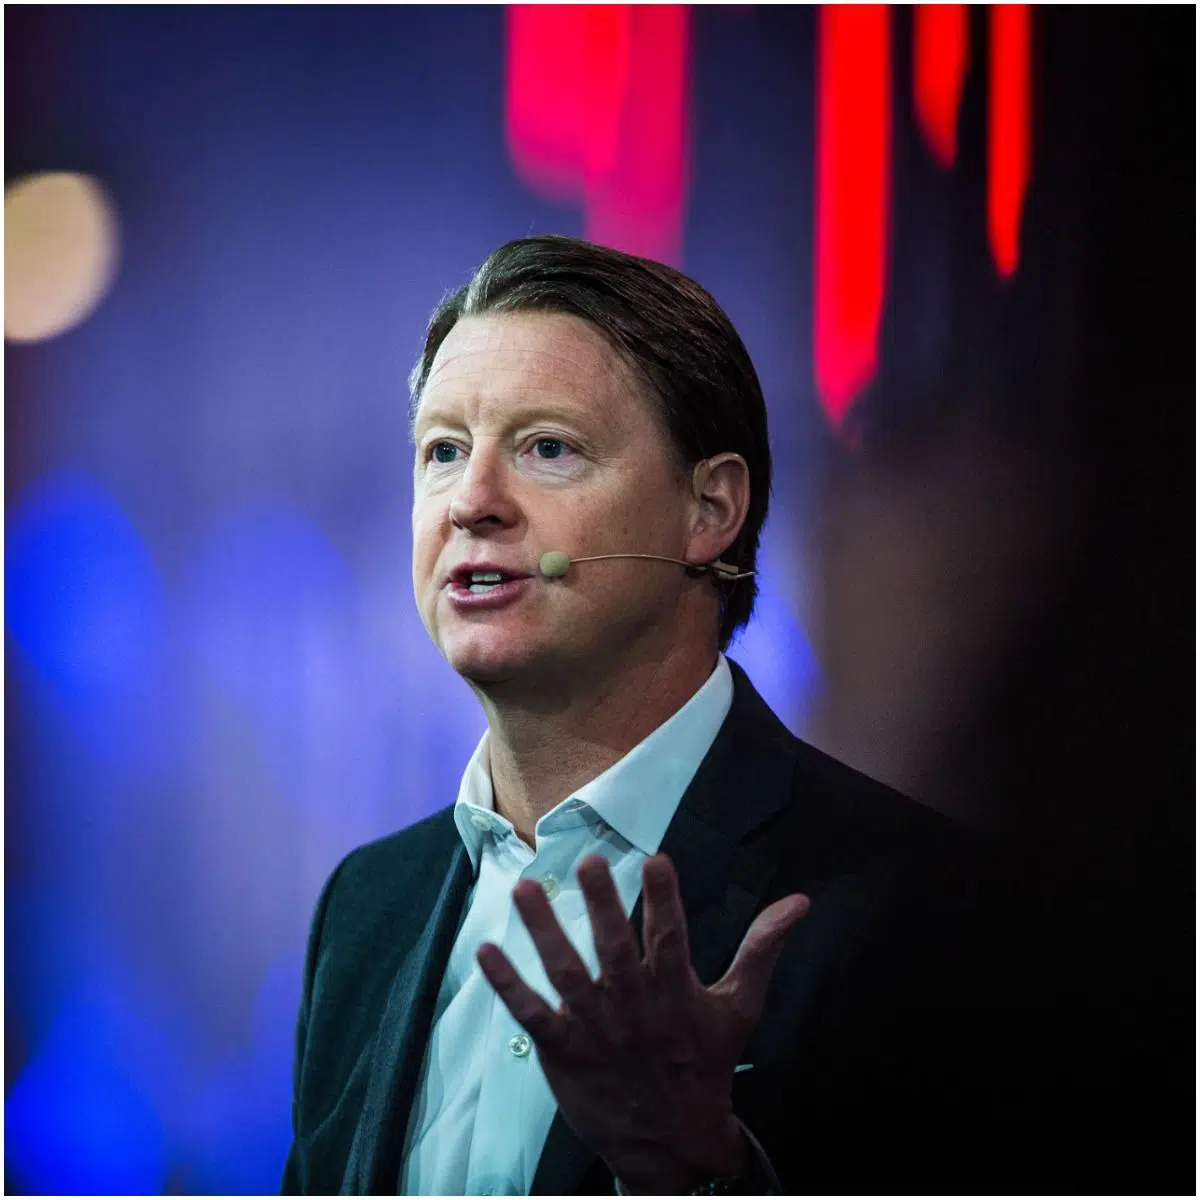 what is the net worth of Hans Vestberg